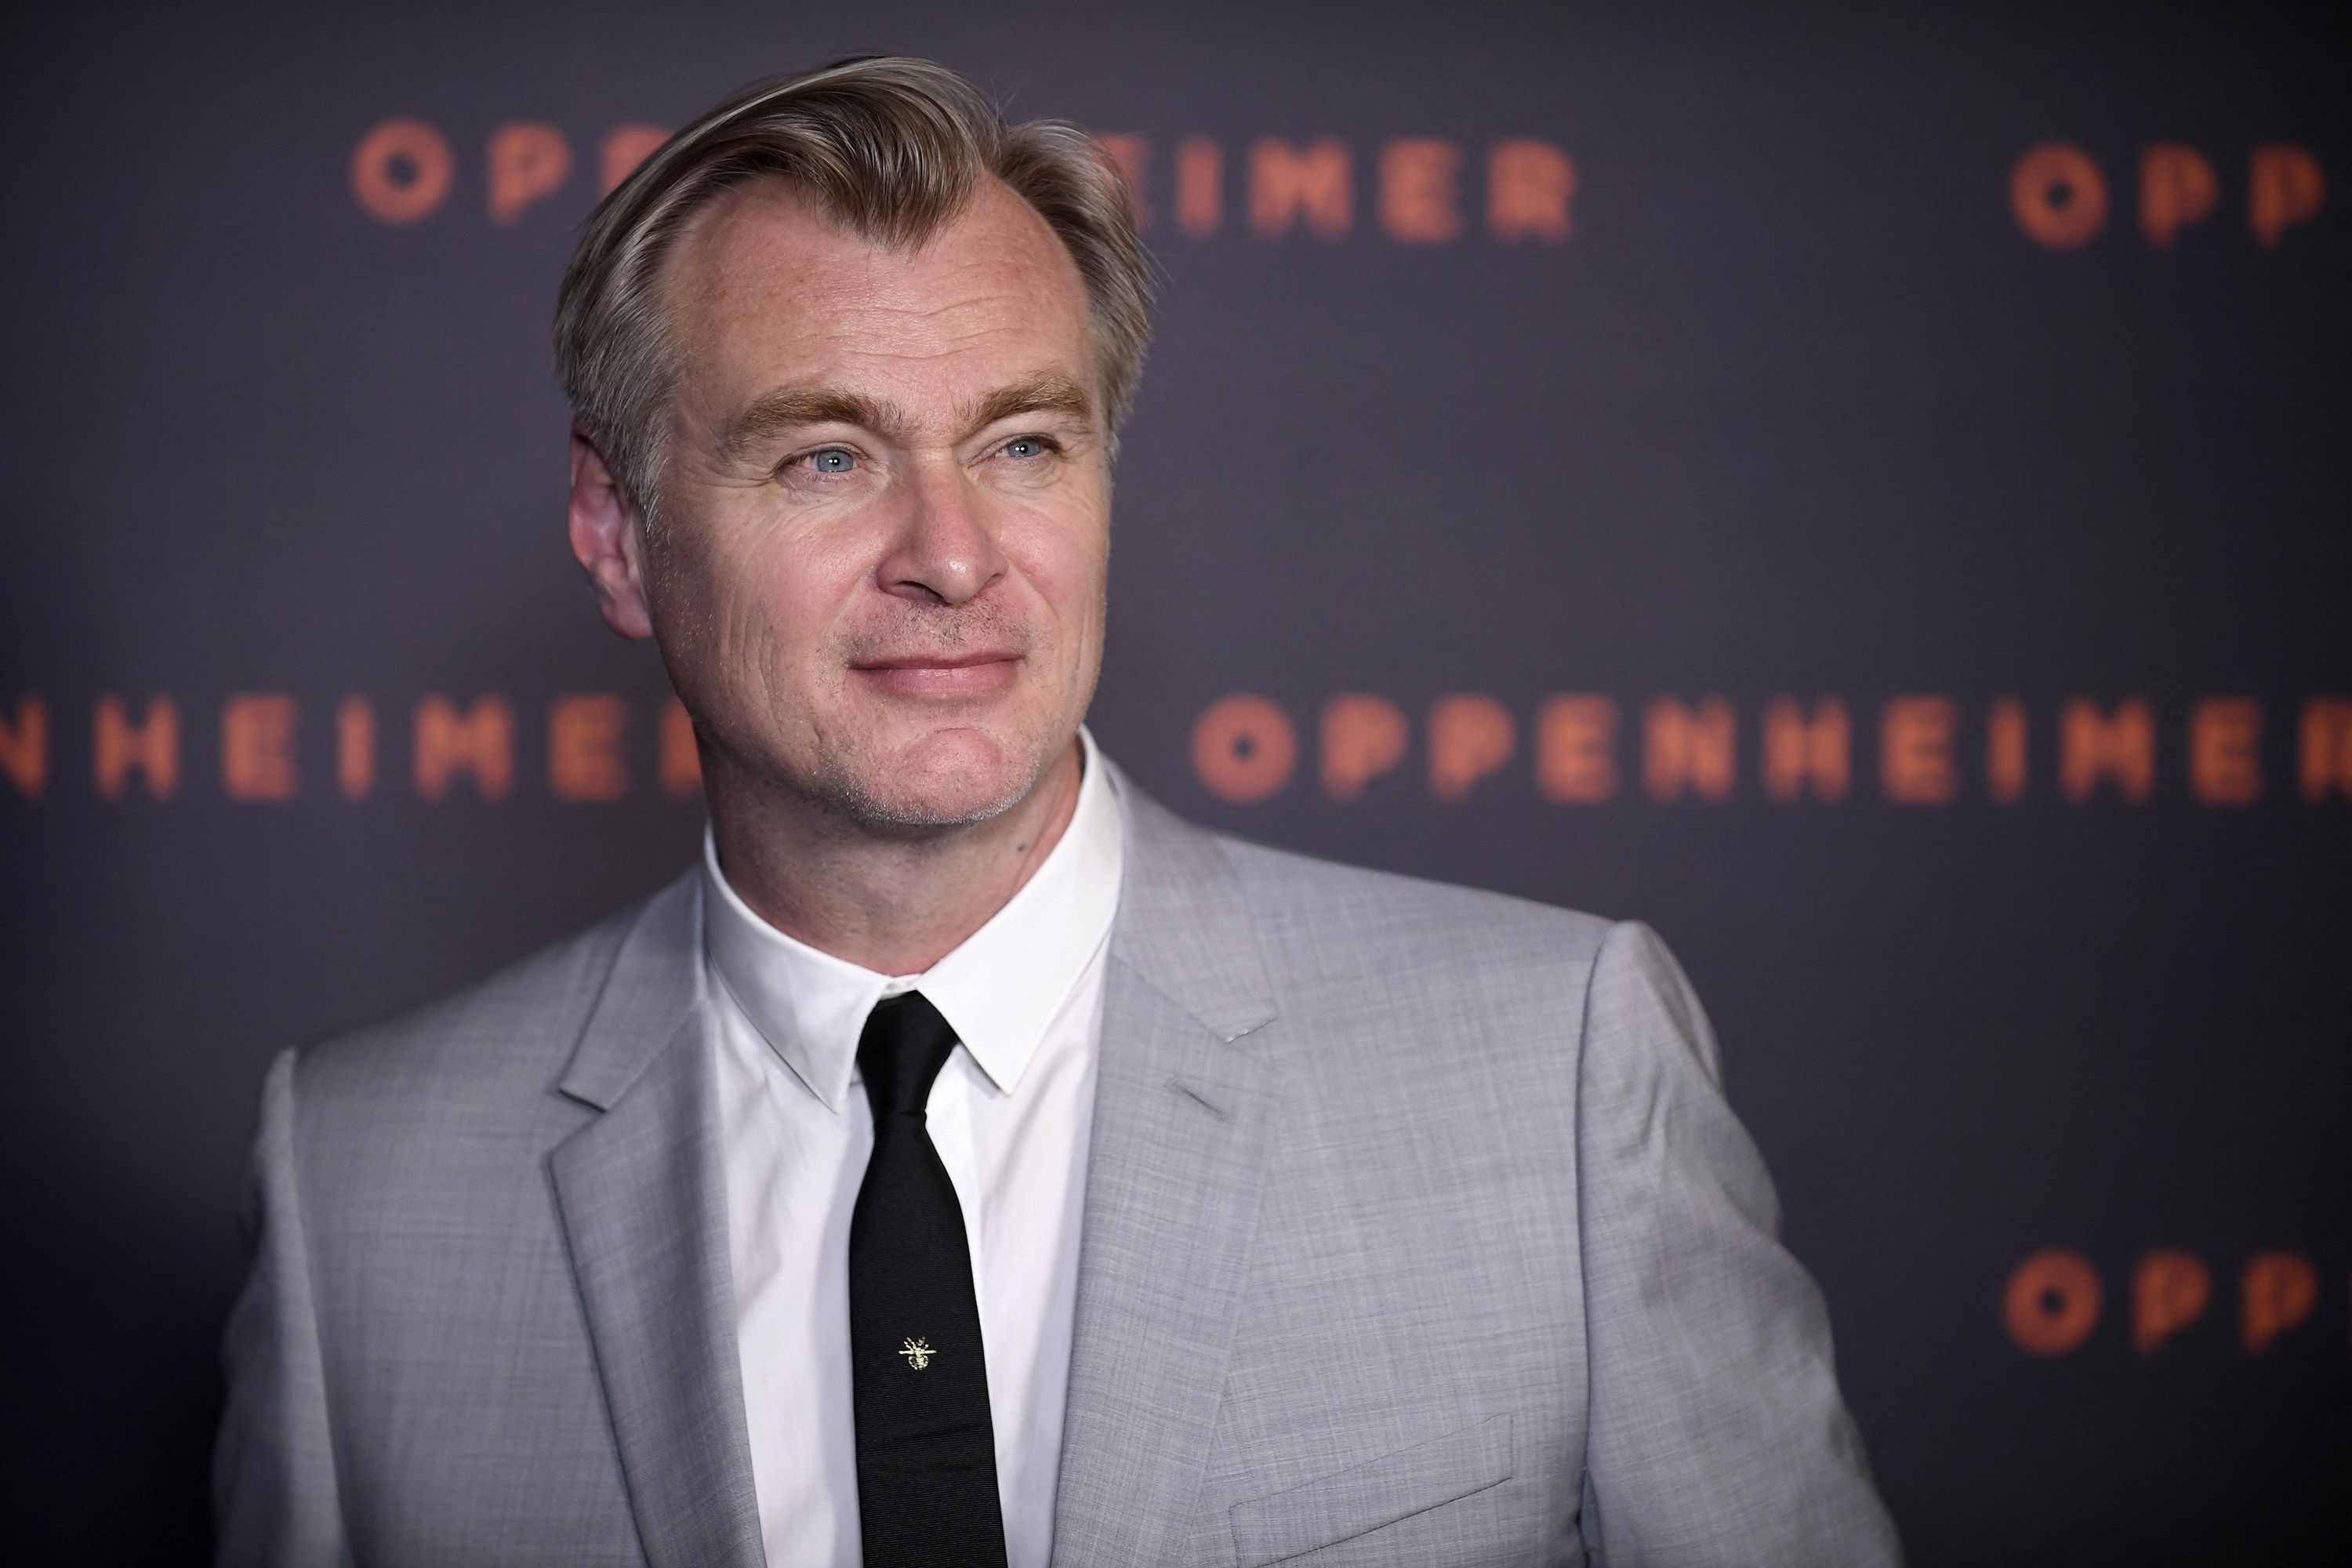 Oppenheimer' director Christopher Nolan was once roasted by his